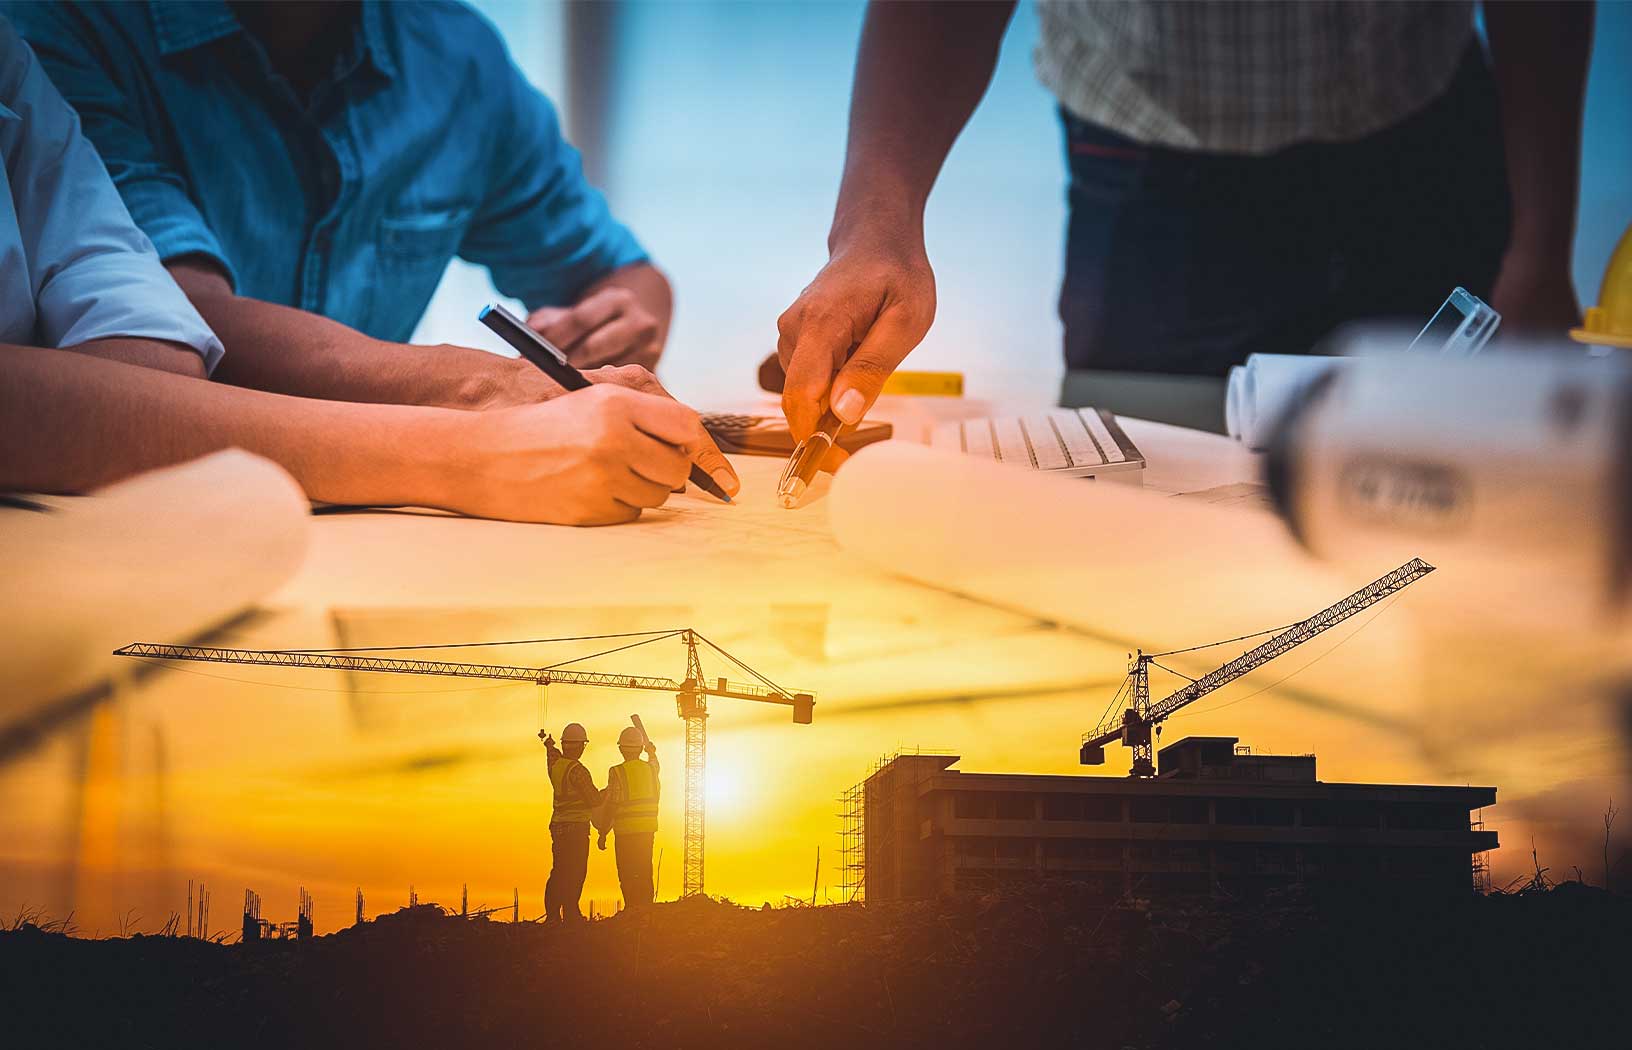 Double exposure of project management team and construction site with tower crane background